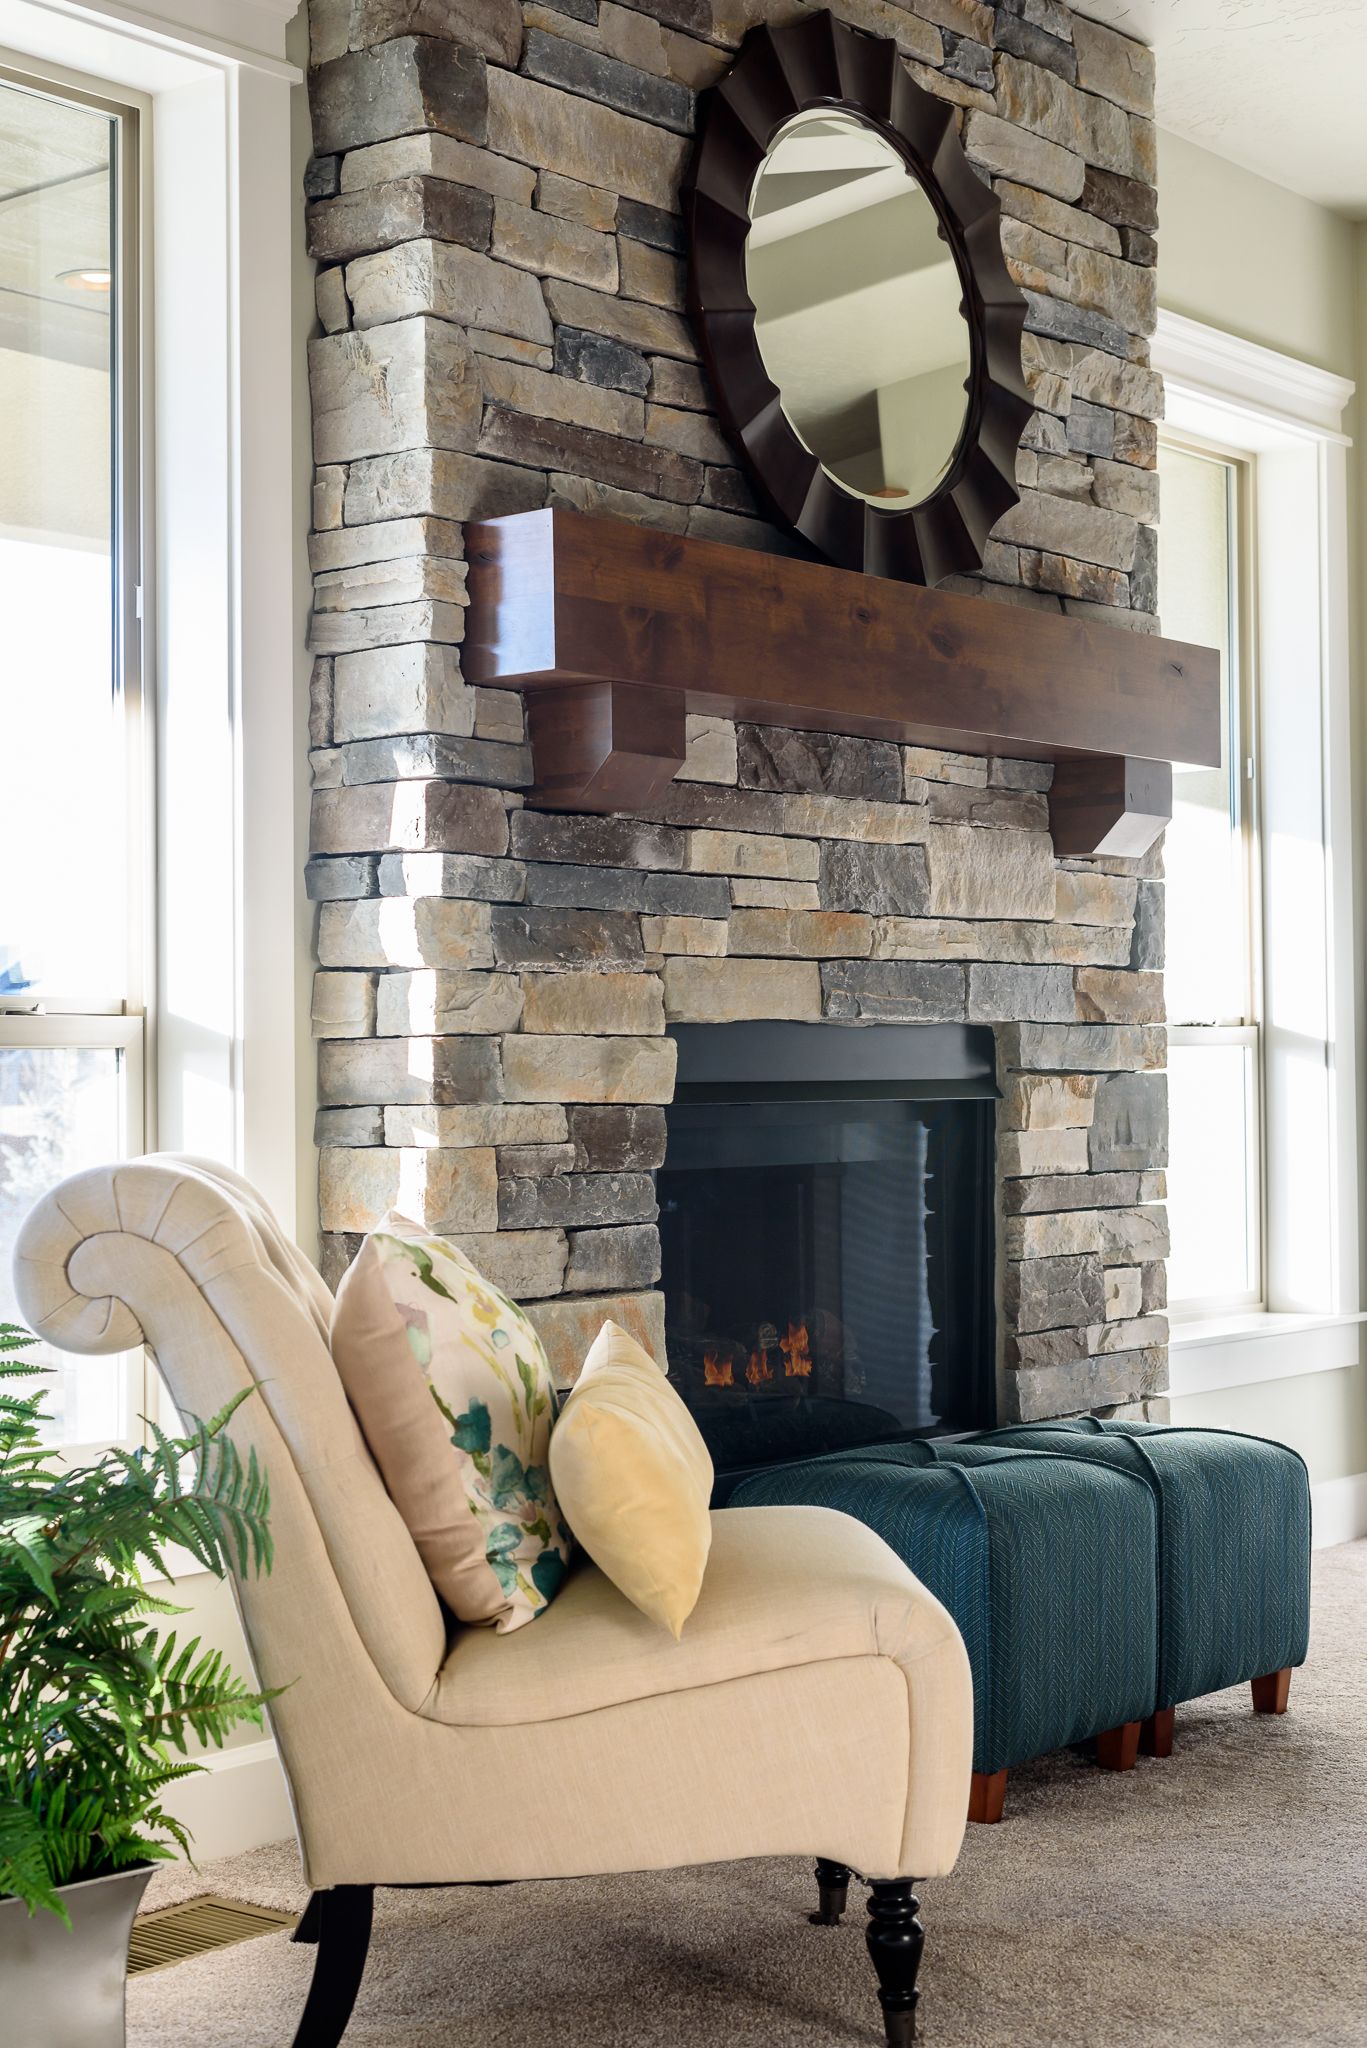 Stacked Stone Fireplace Ideas Beautiful Echo Ridge Country Ledgestone On This Floor to Ceiling Stone